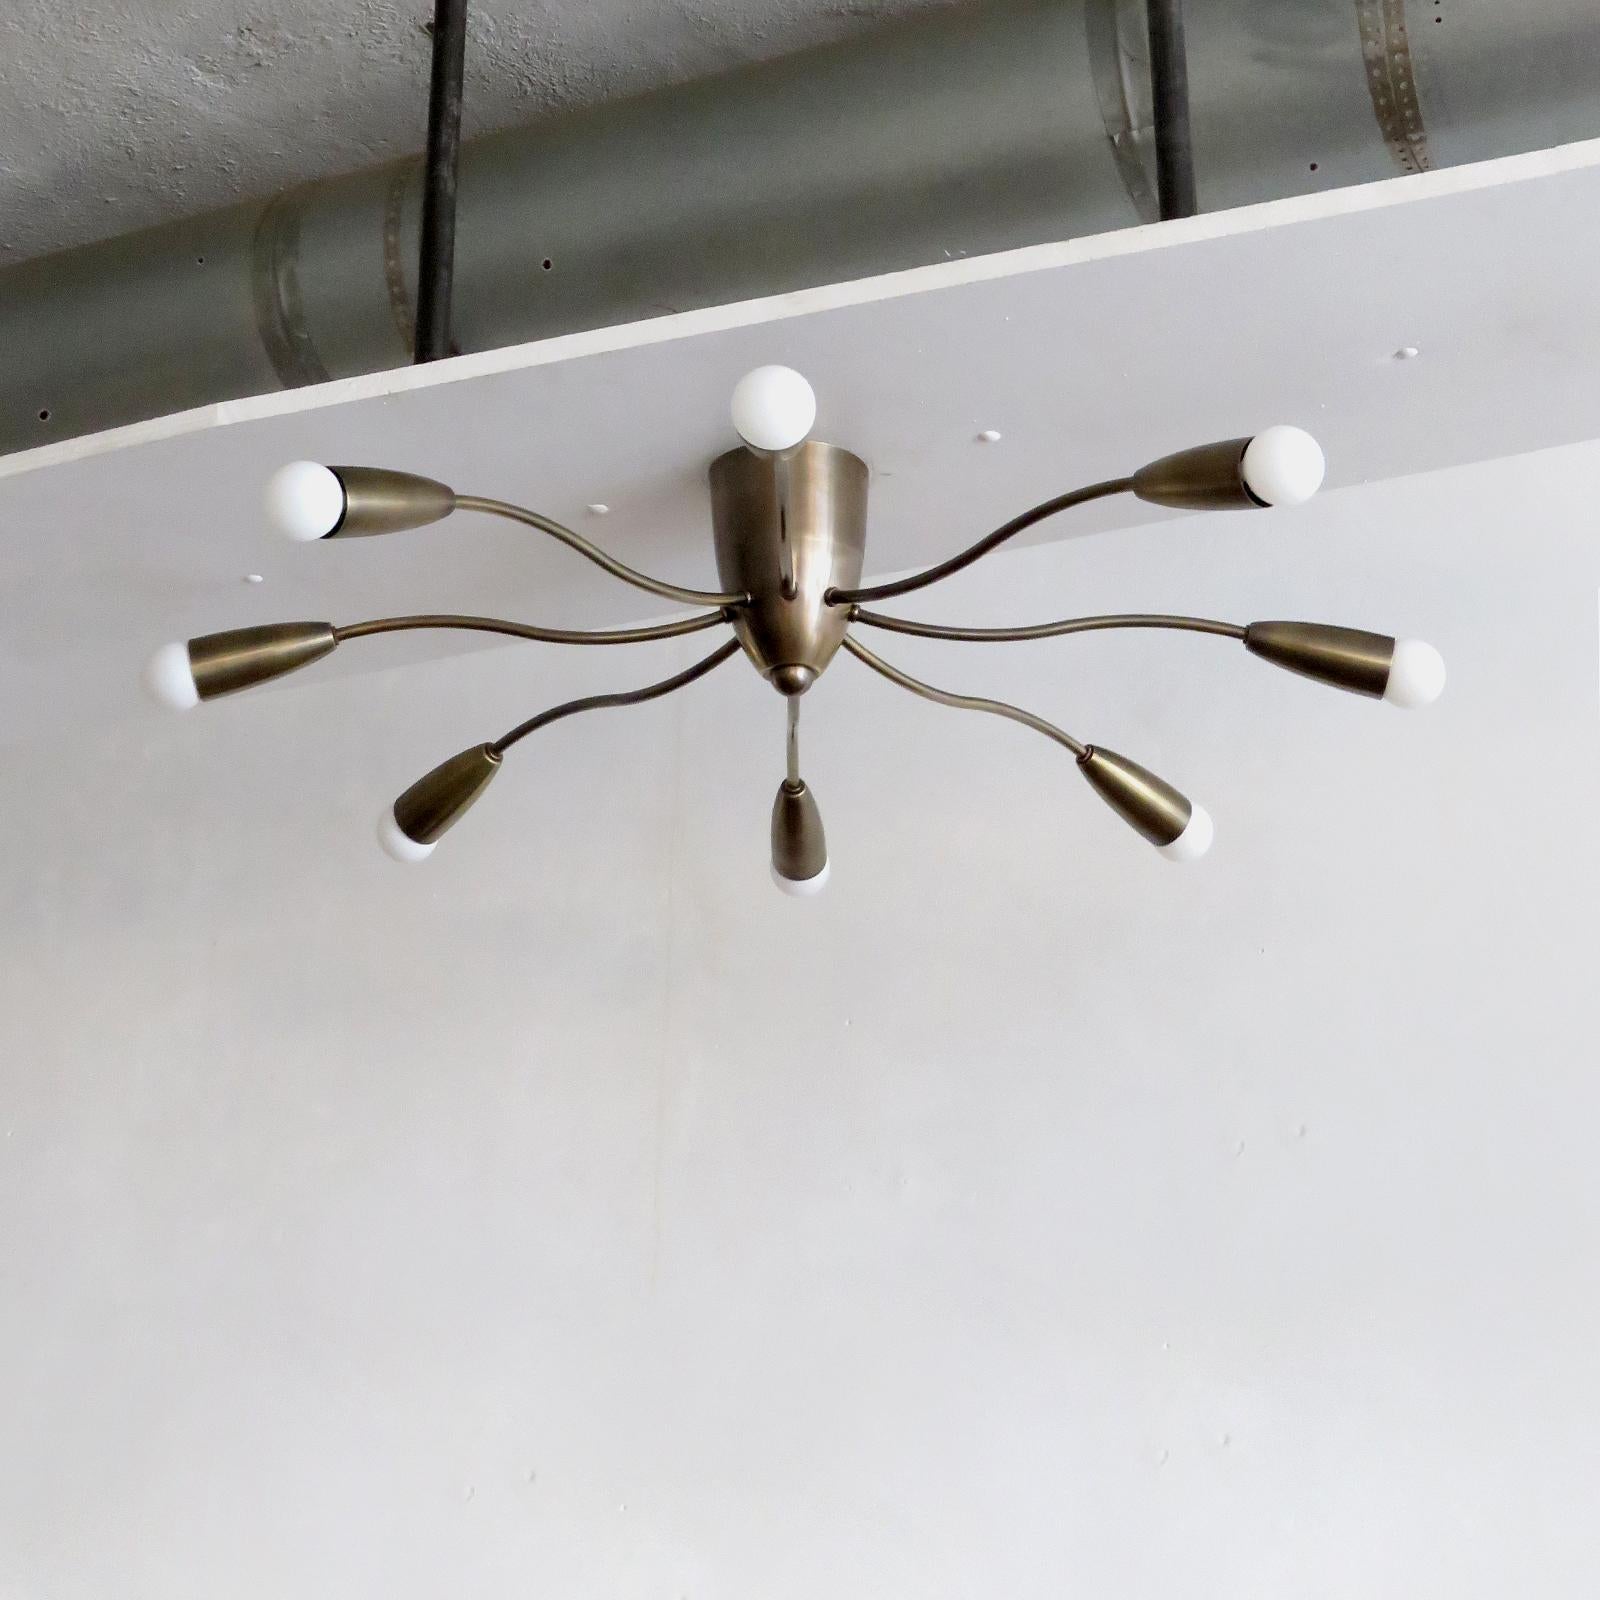 Elegant Aura-30 flushmount ceiling light in aged brass finish designed by Gallery L7, handcrafted and finished in Los Angeles from American brass. Eight E12 sockets per fixture, max. wattage 40w each or 3-7w LED equivalent, wired for US standards or